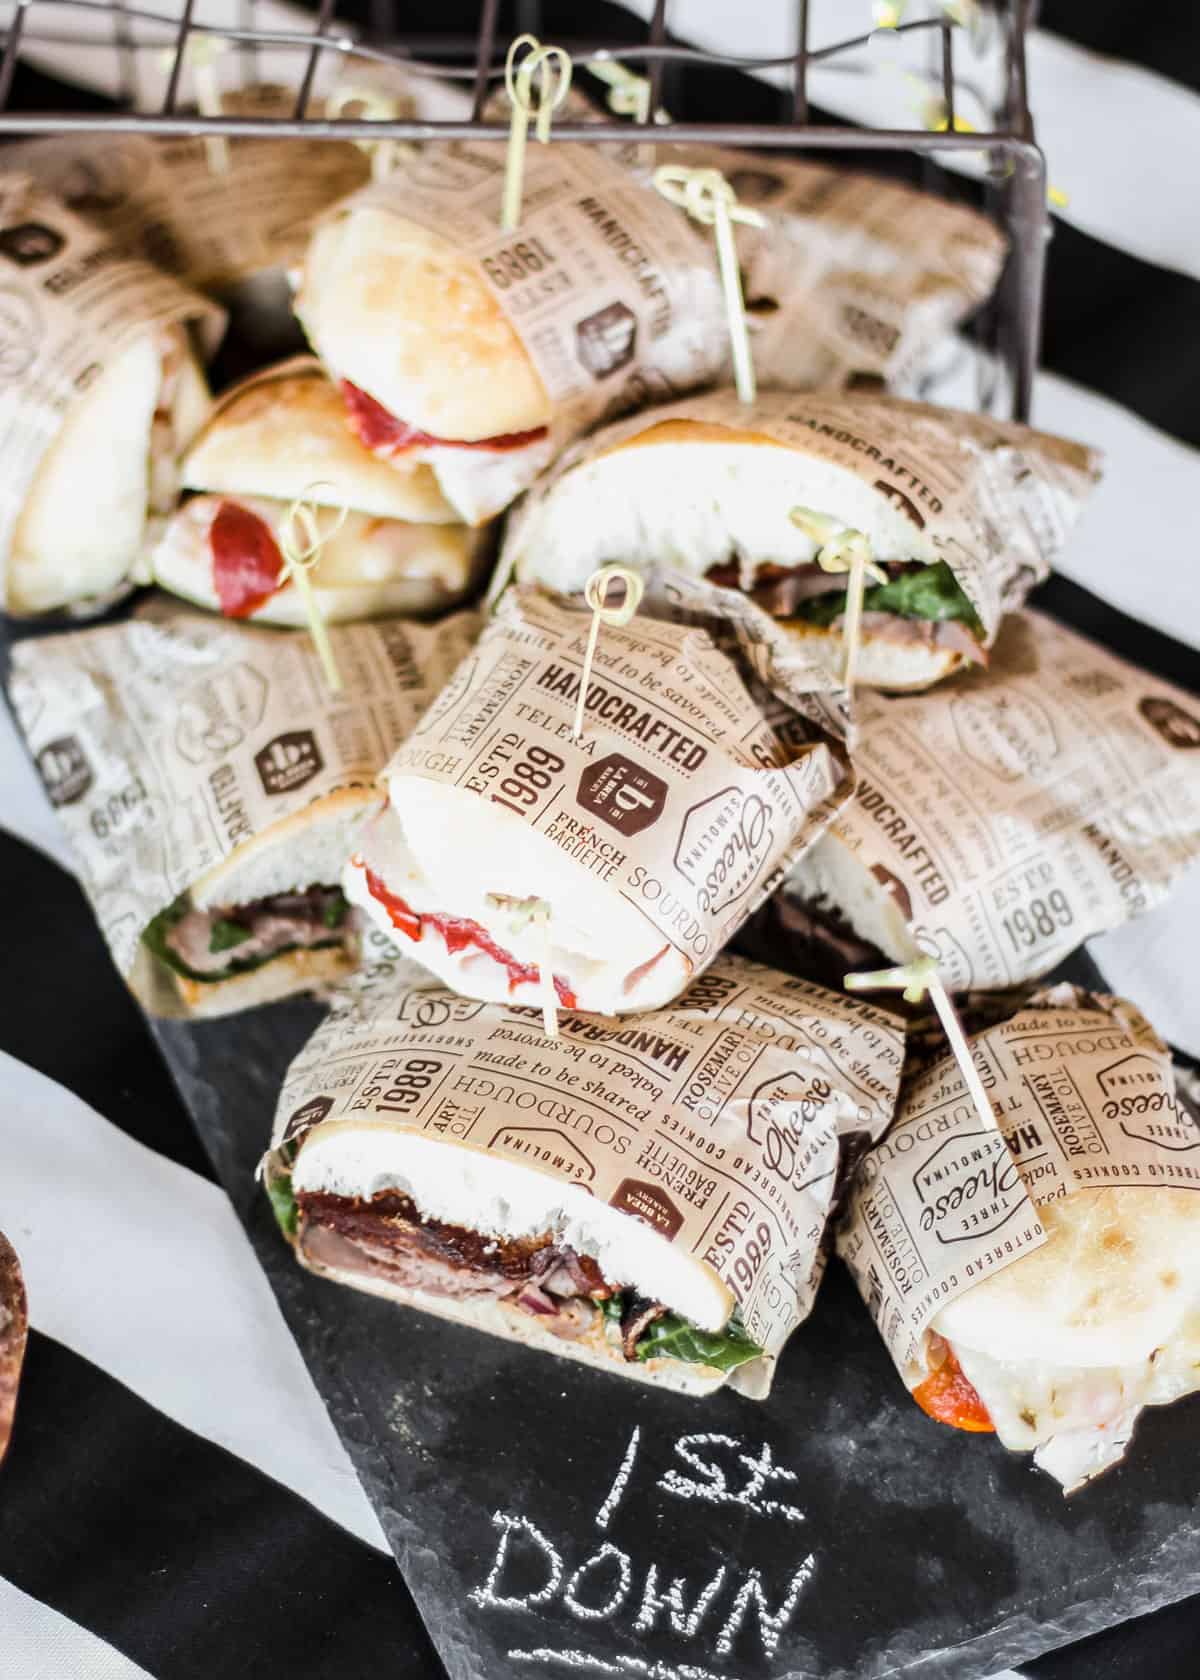 sandwiches wrapped in bakery paper, piled on party table.